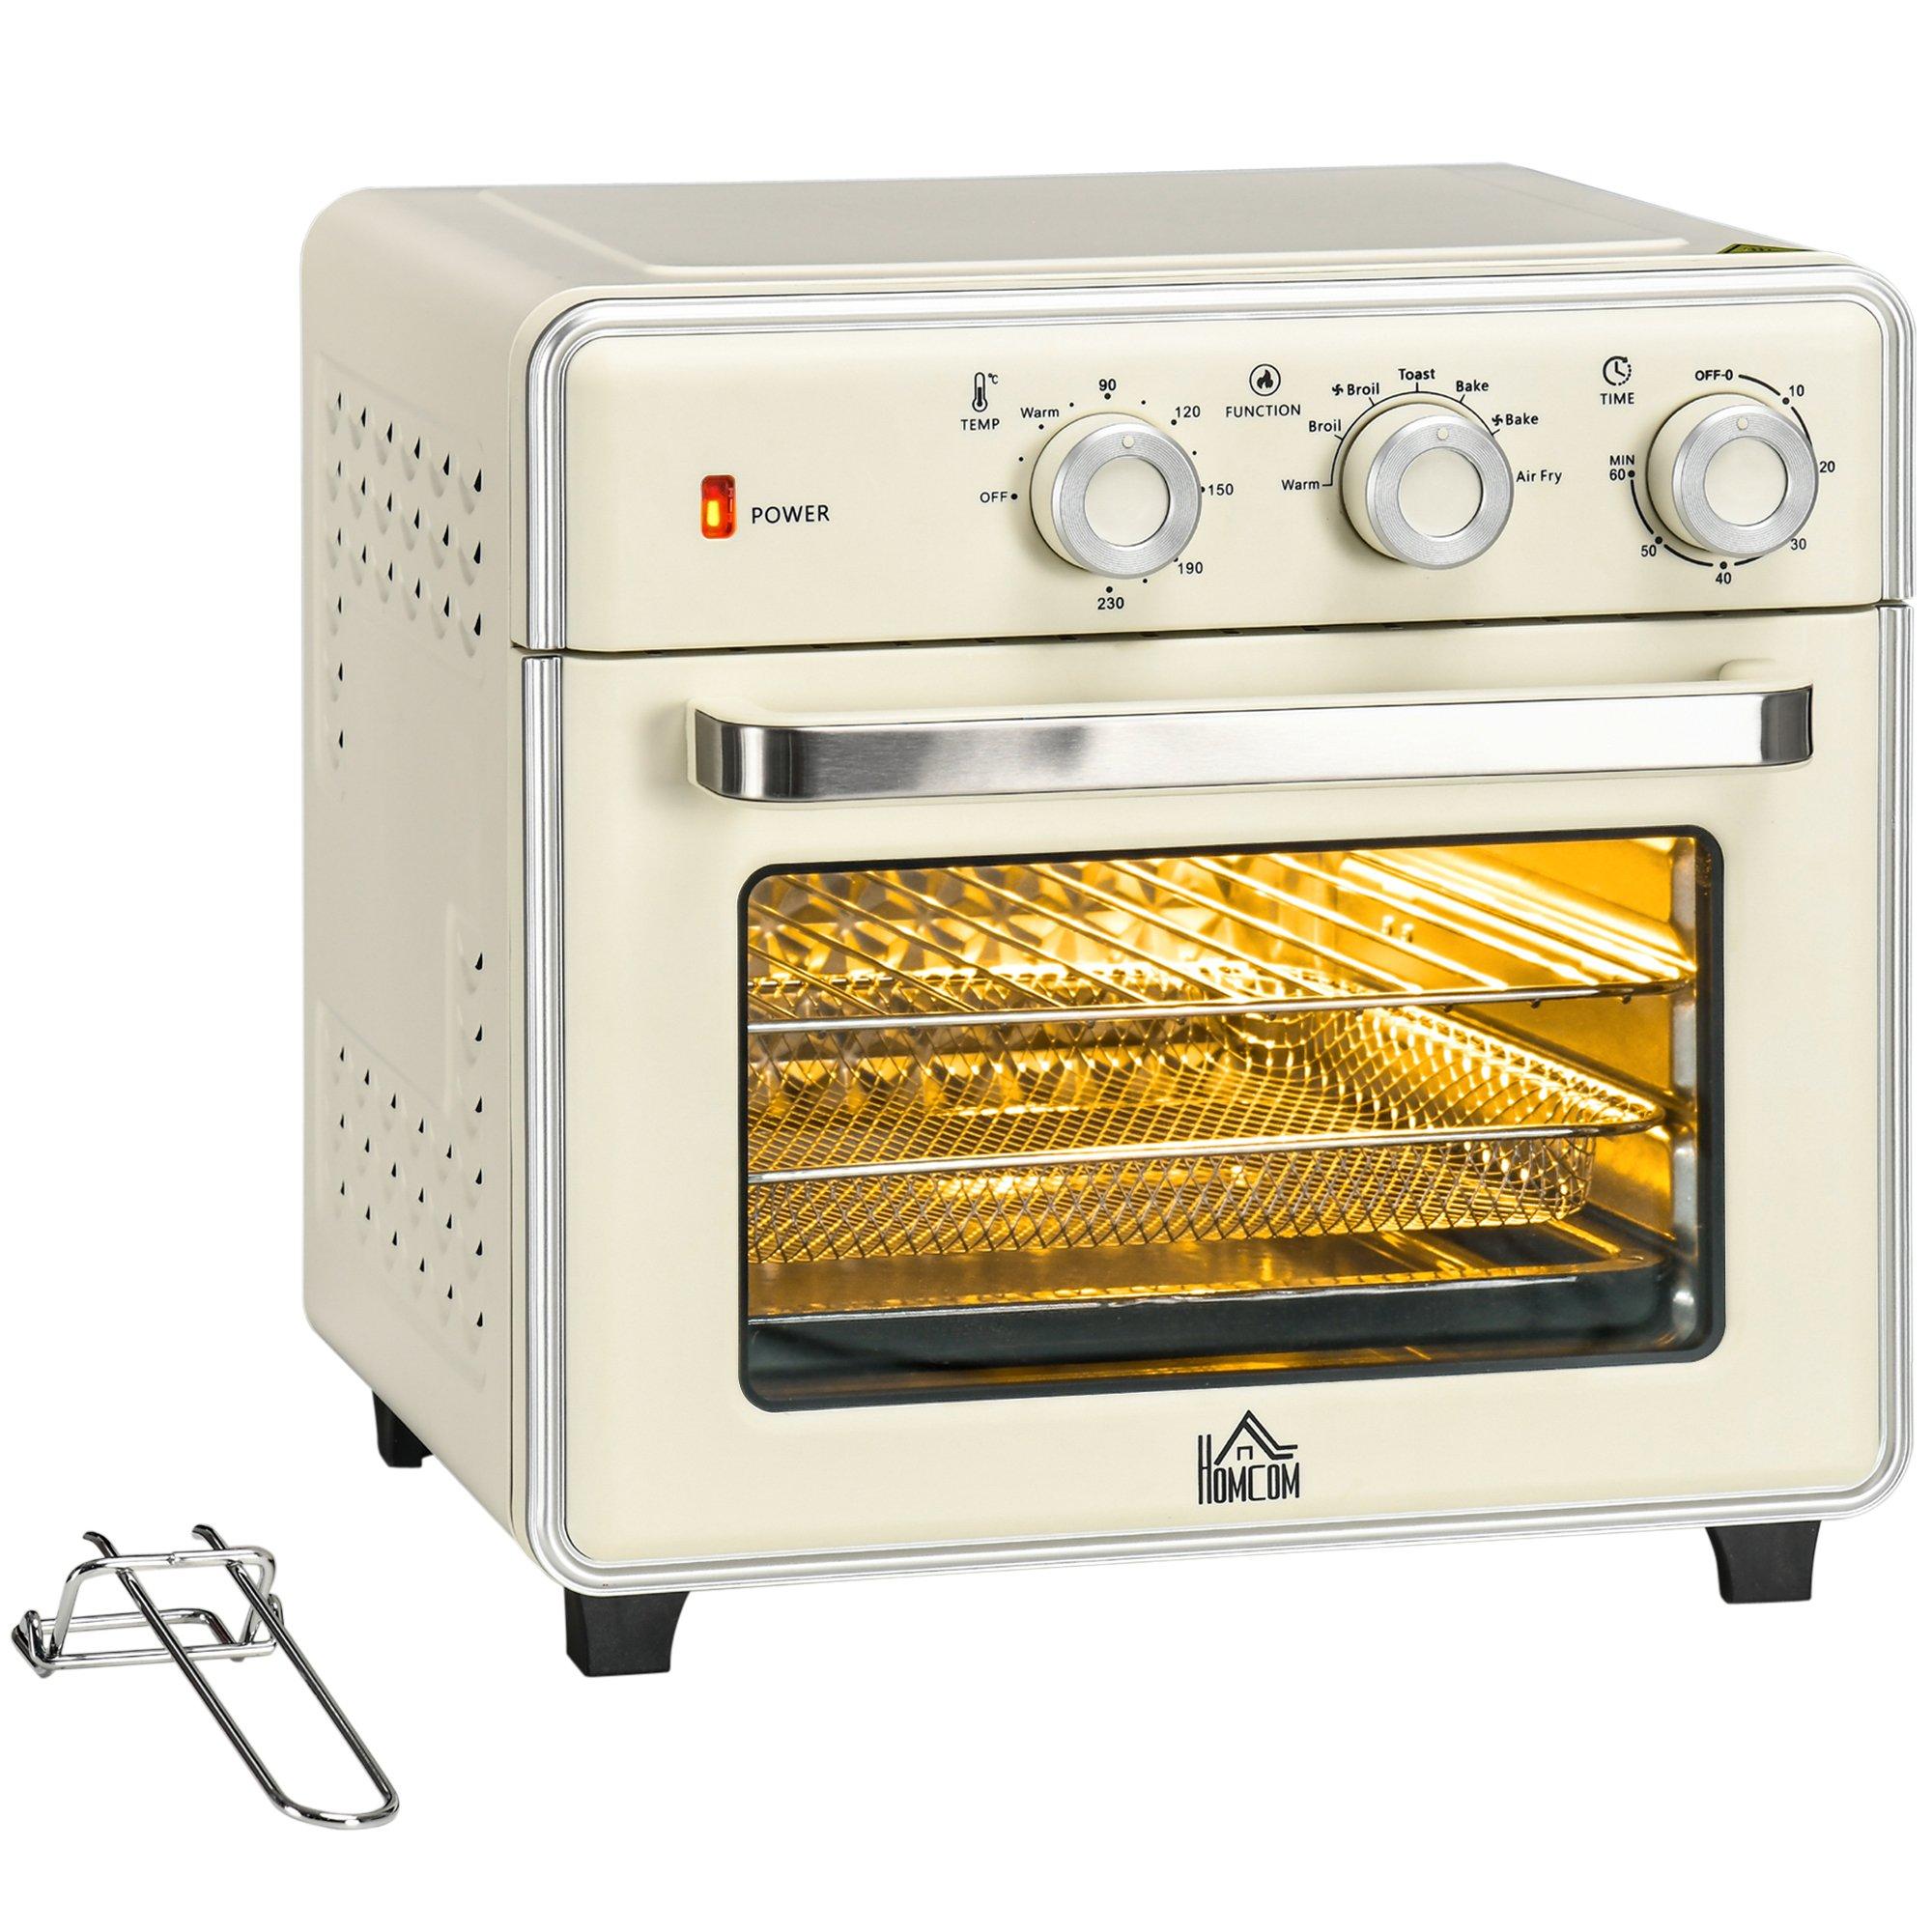 Toaster Oven 20L Convection Oven Warm Broil Toast Bake Air Fryer